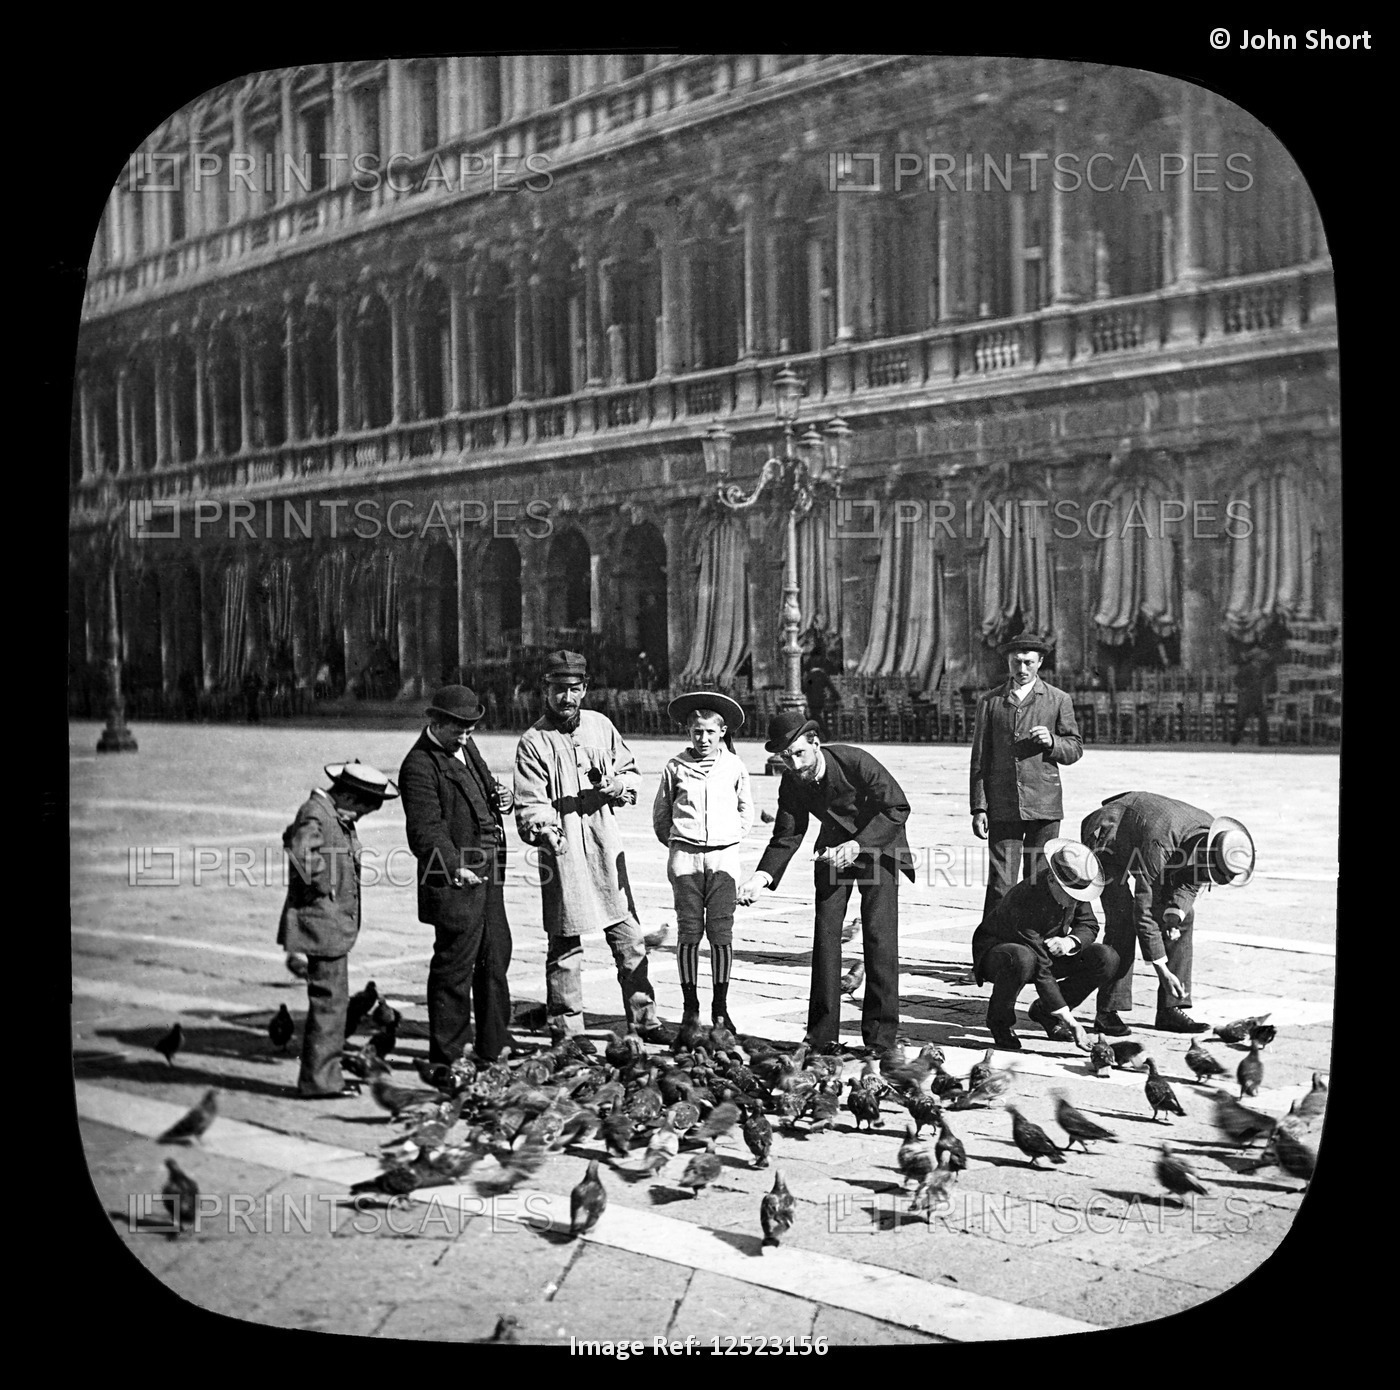 Feeding the pigeons in the Piazza of St. Mark's, Venice circa 1900 on a magic ...